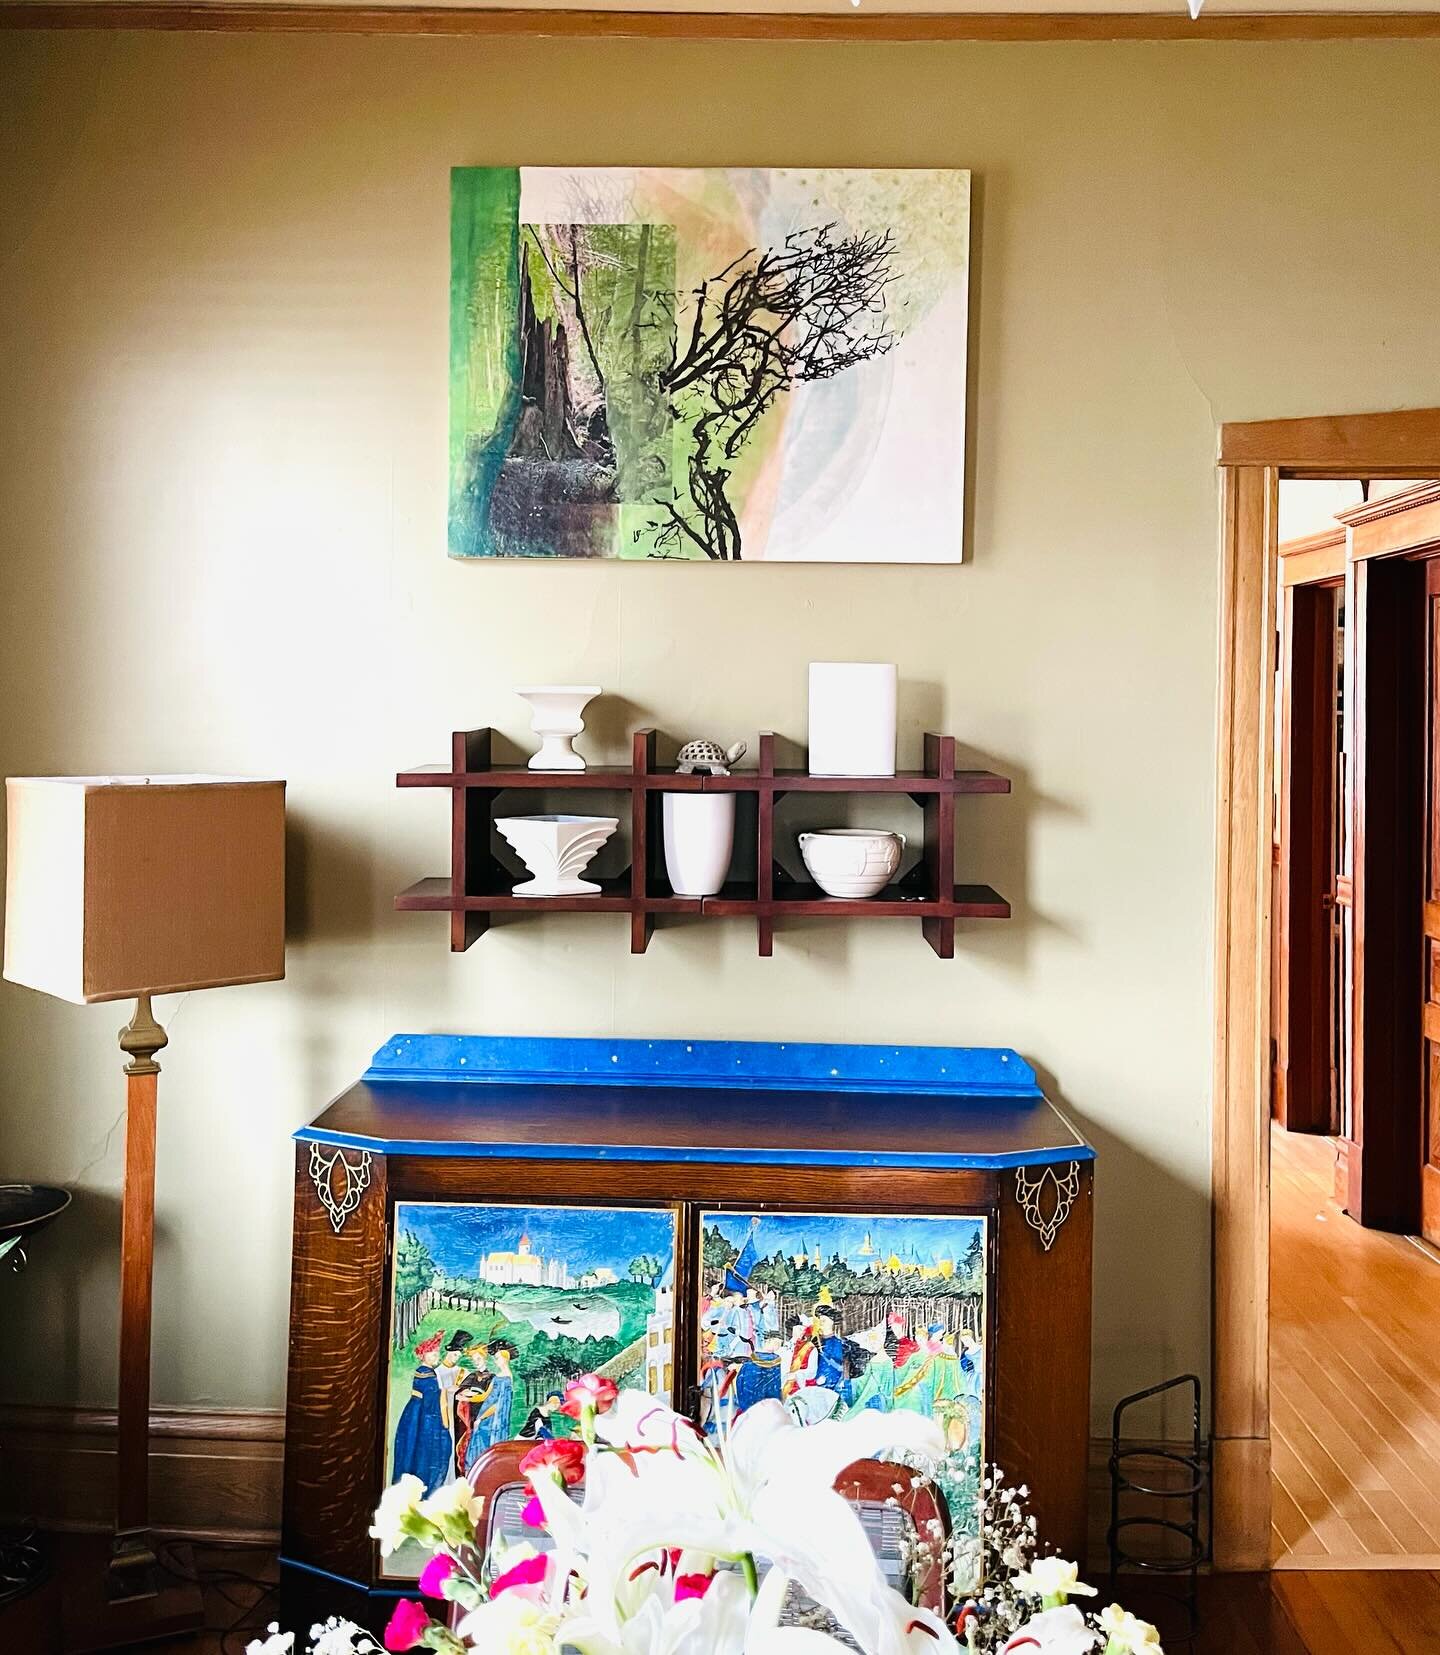 My painting &ldquo;Renewal&rdquo; Hanging on my wall at home.
Better than using an app to show it installed! Part of my Forest series, Rejuvenation which reflects the woods as a place of refuge and the cycle of death and rebirth. See more from this s